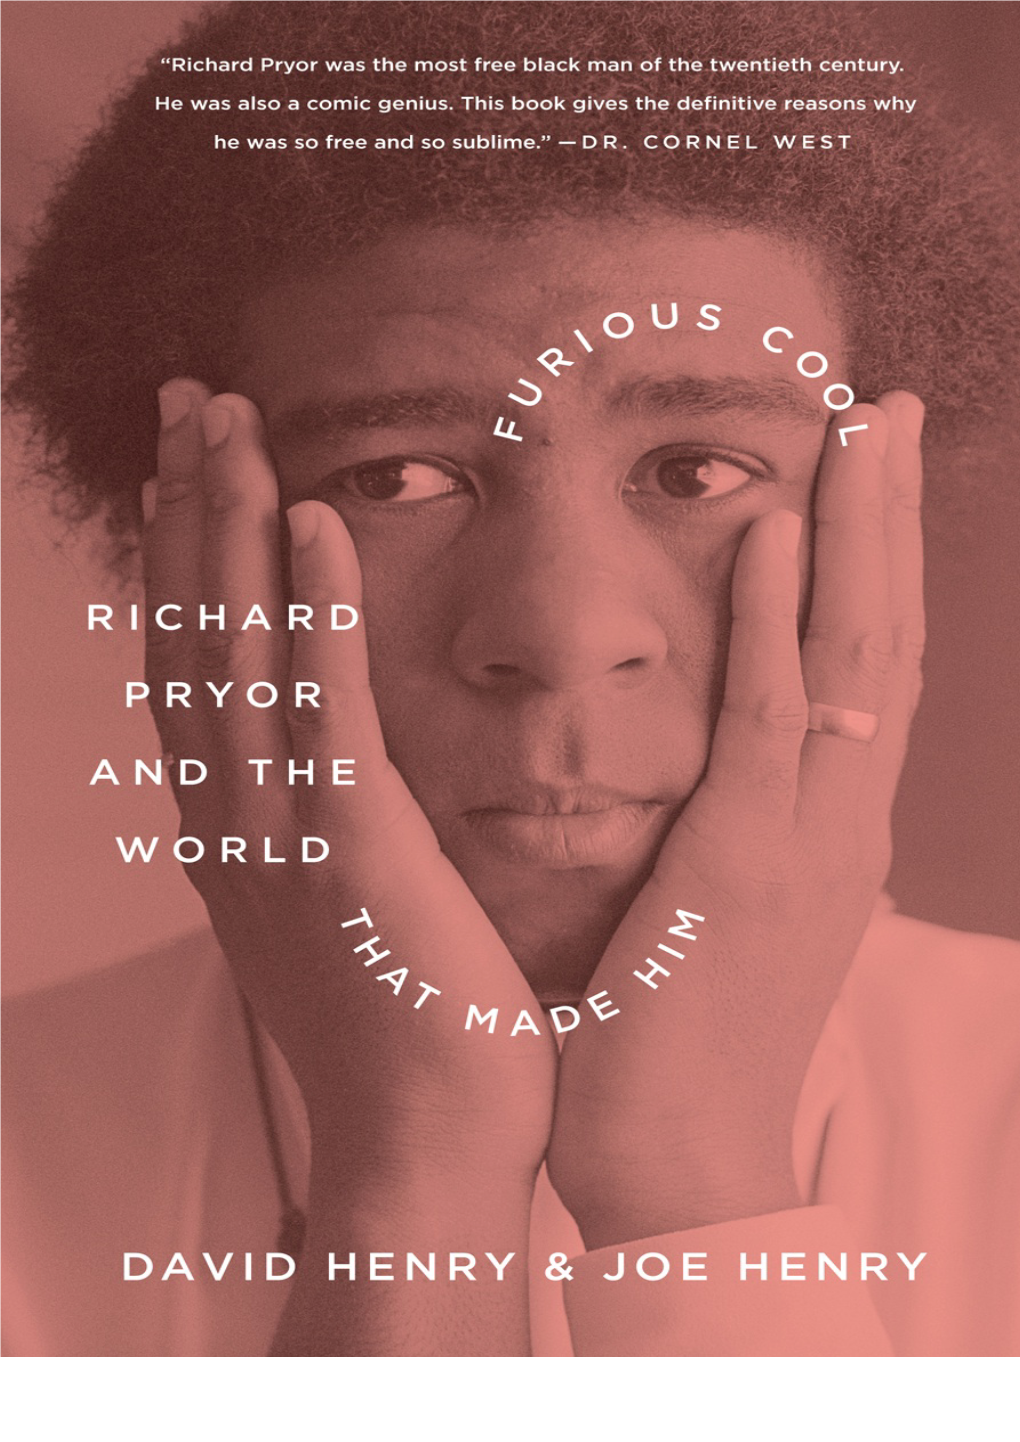 Furious Cool: Richard Pryor and the World That Made Him